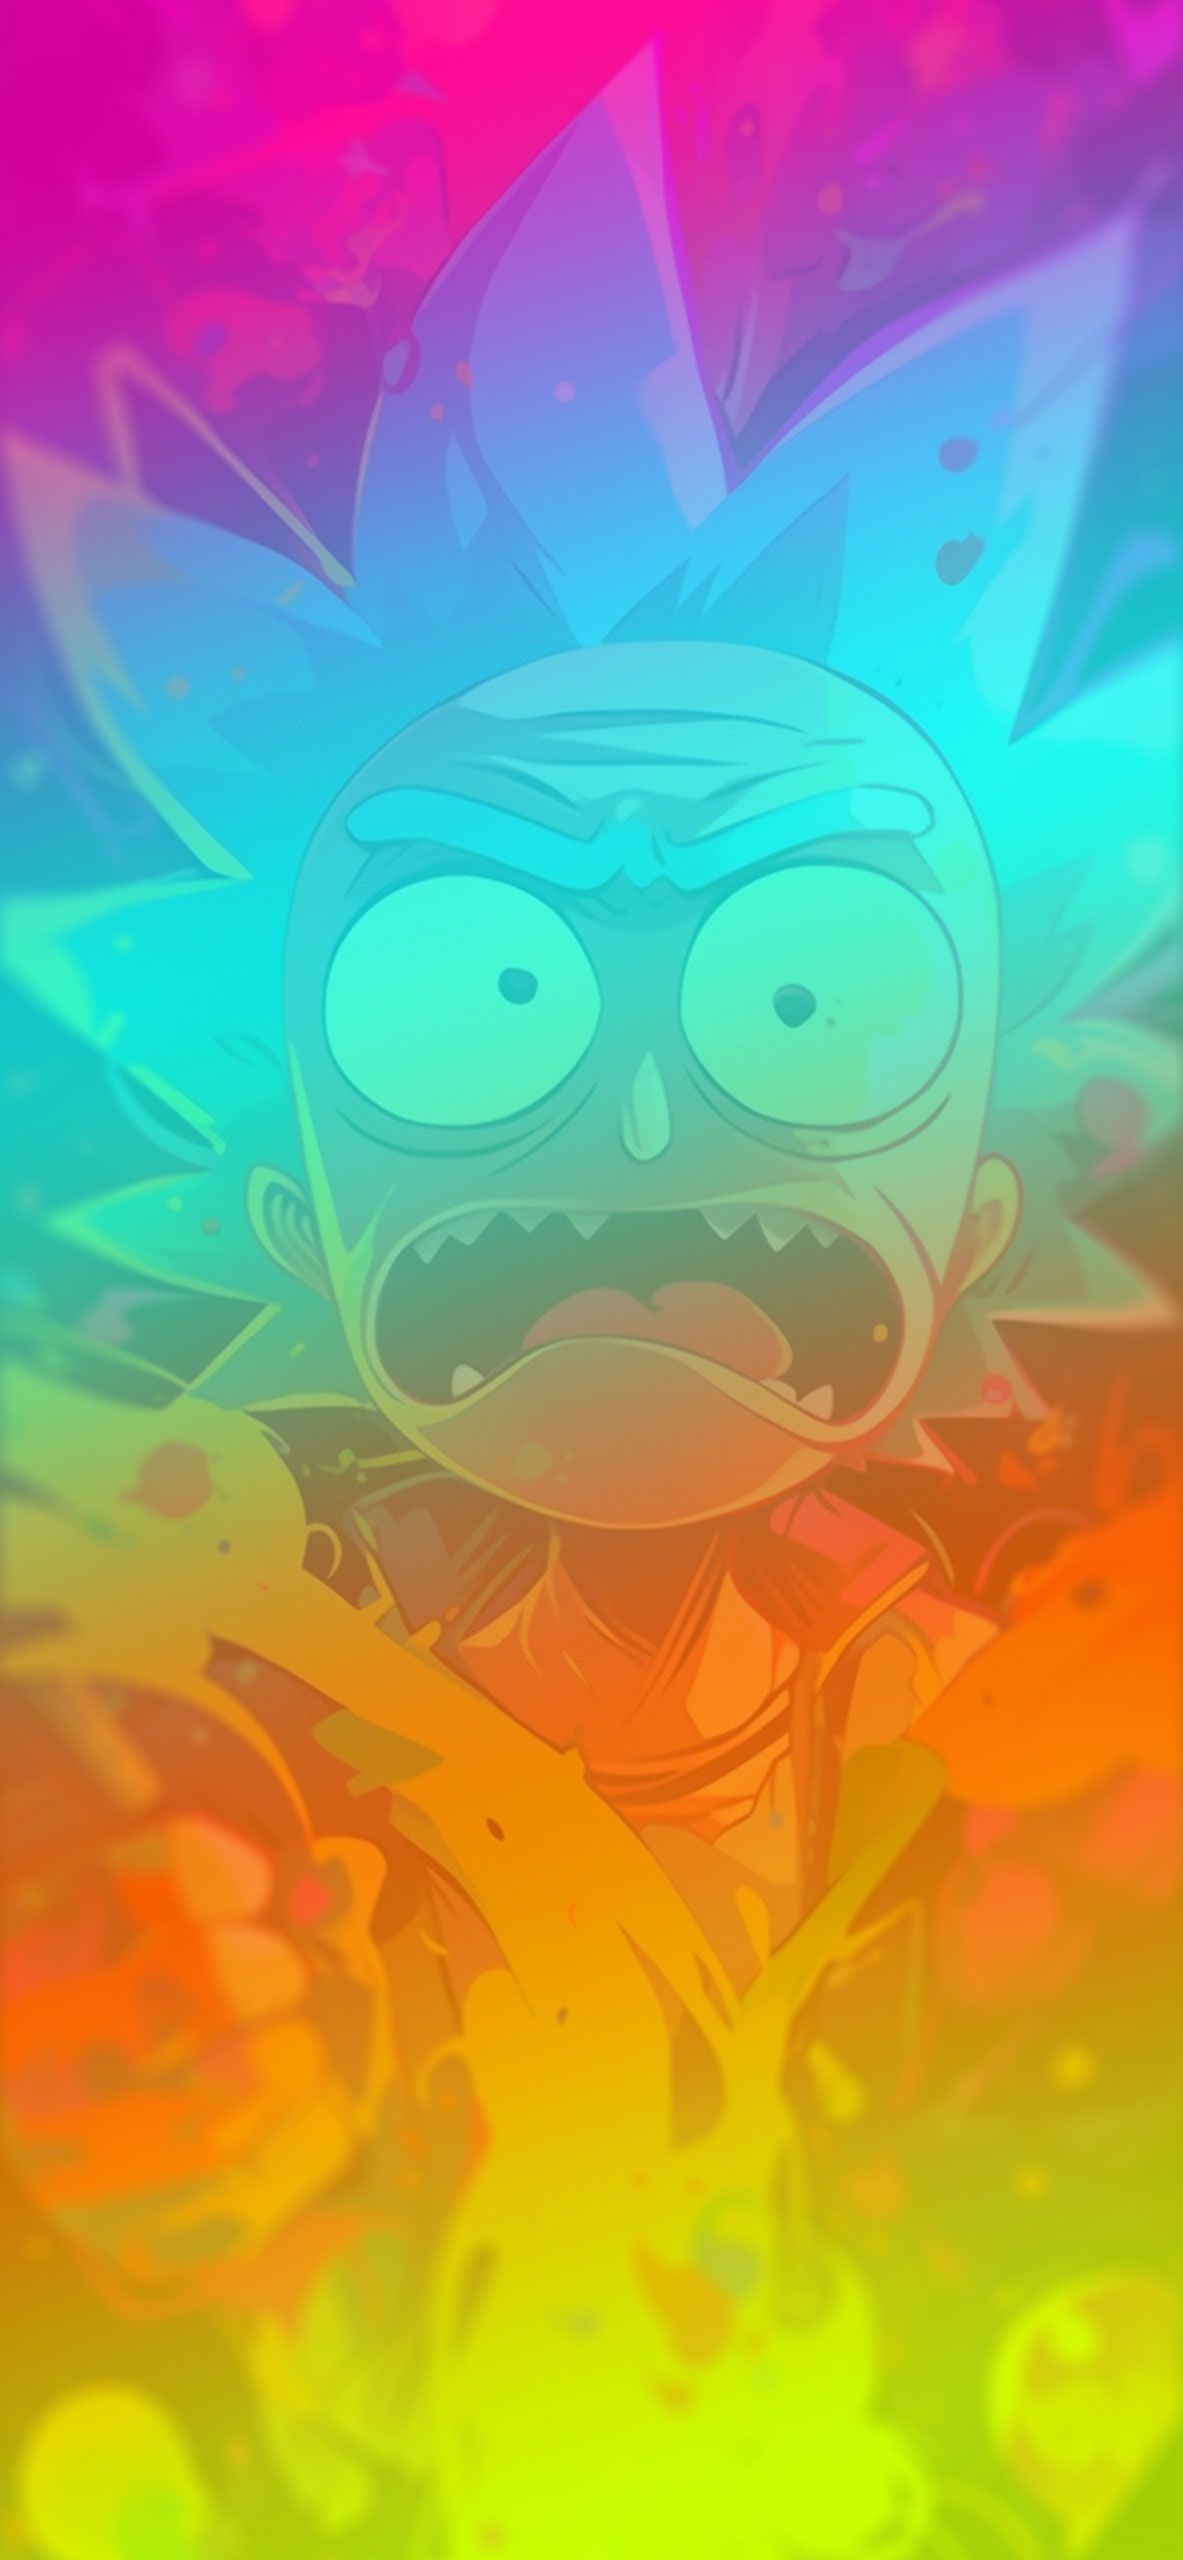 Rick and Morty wallpaper for iPhone and Android phone - Rick and Morty